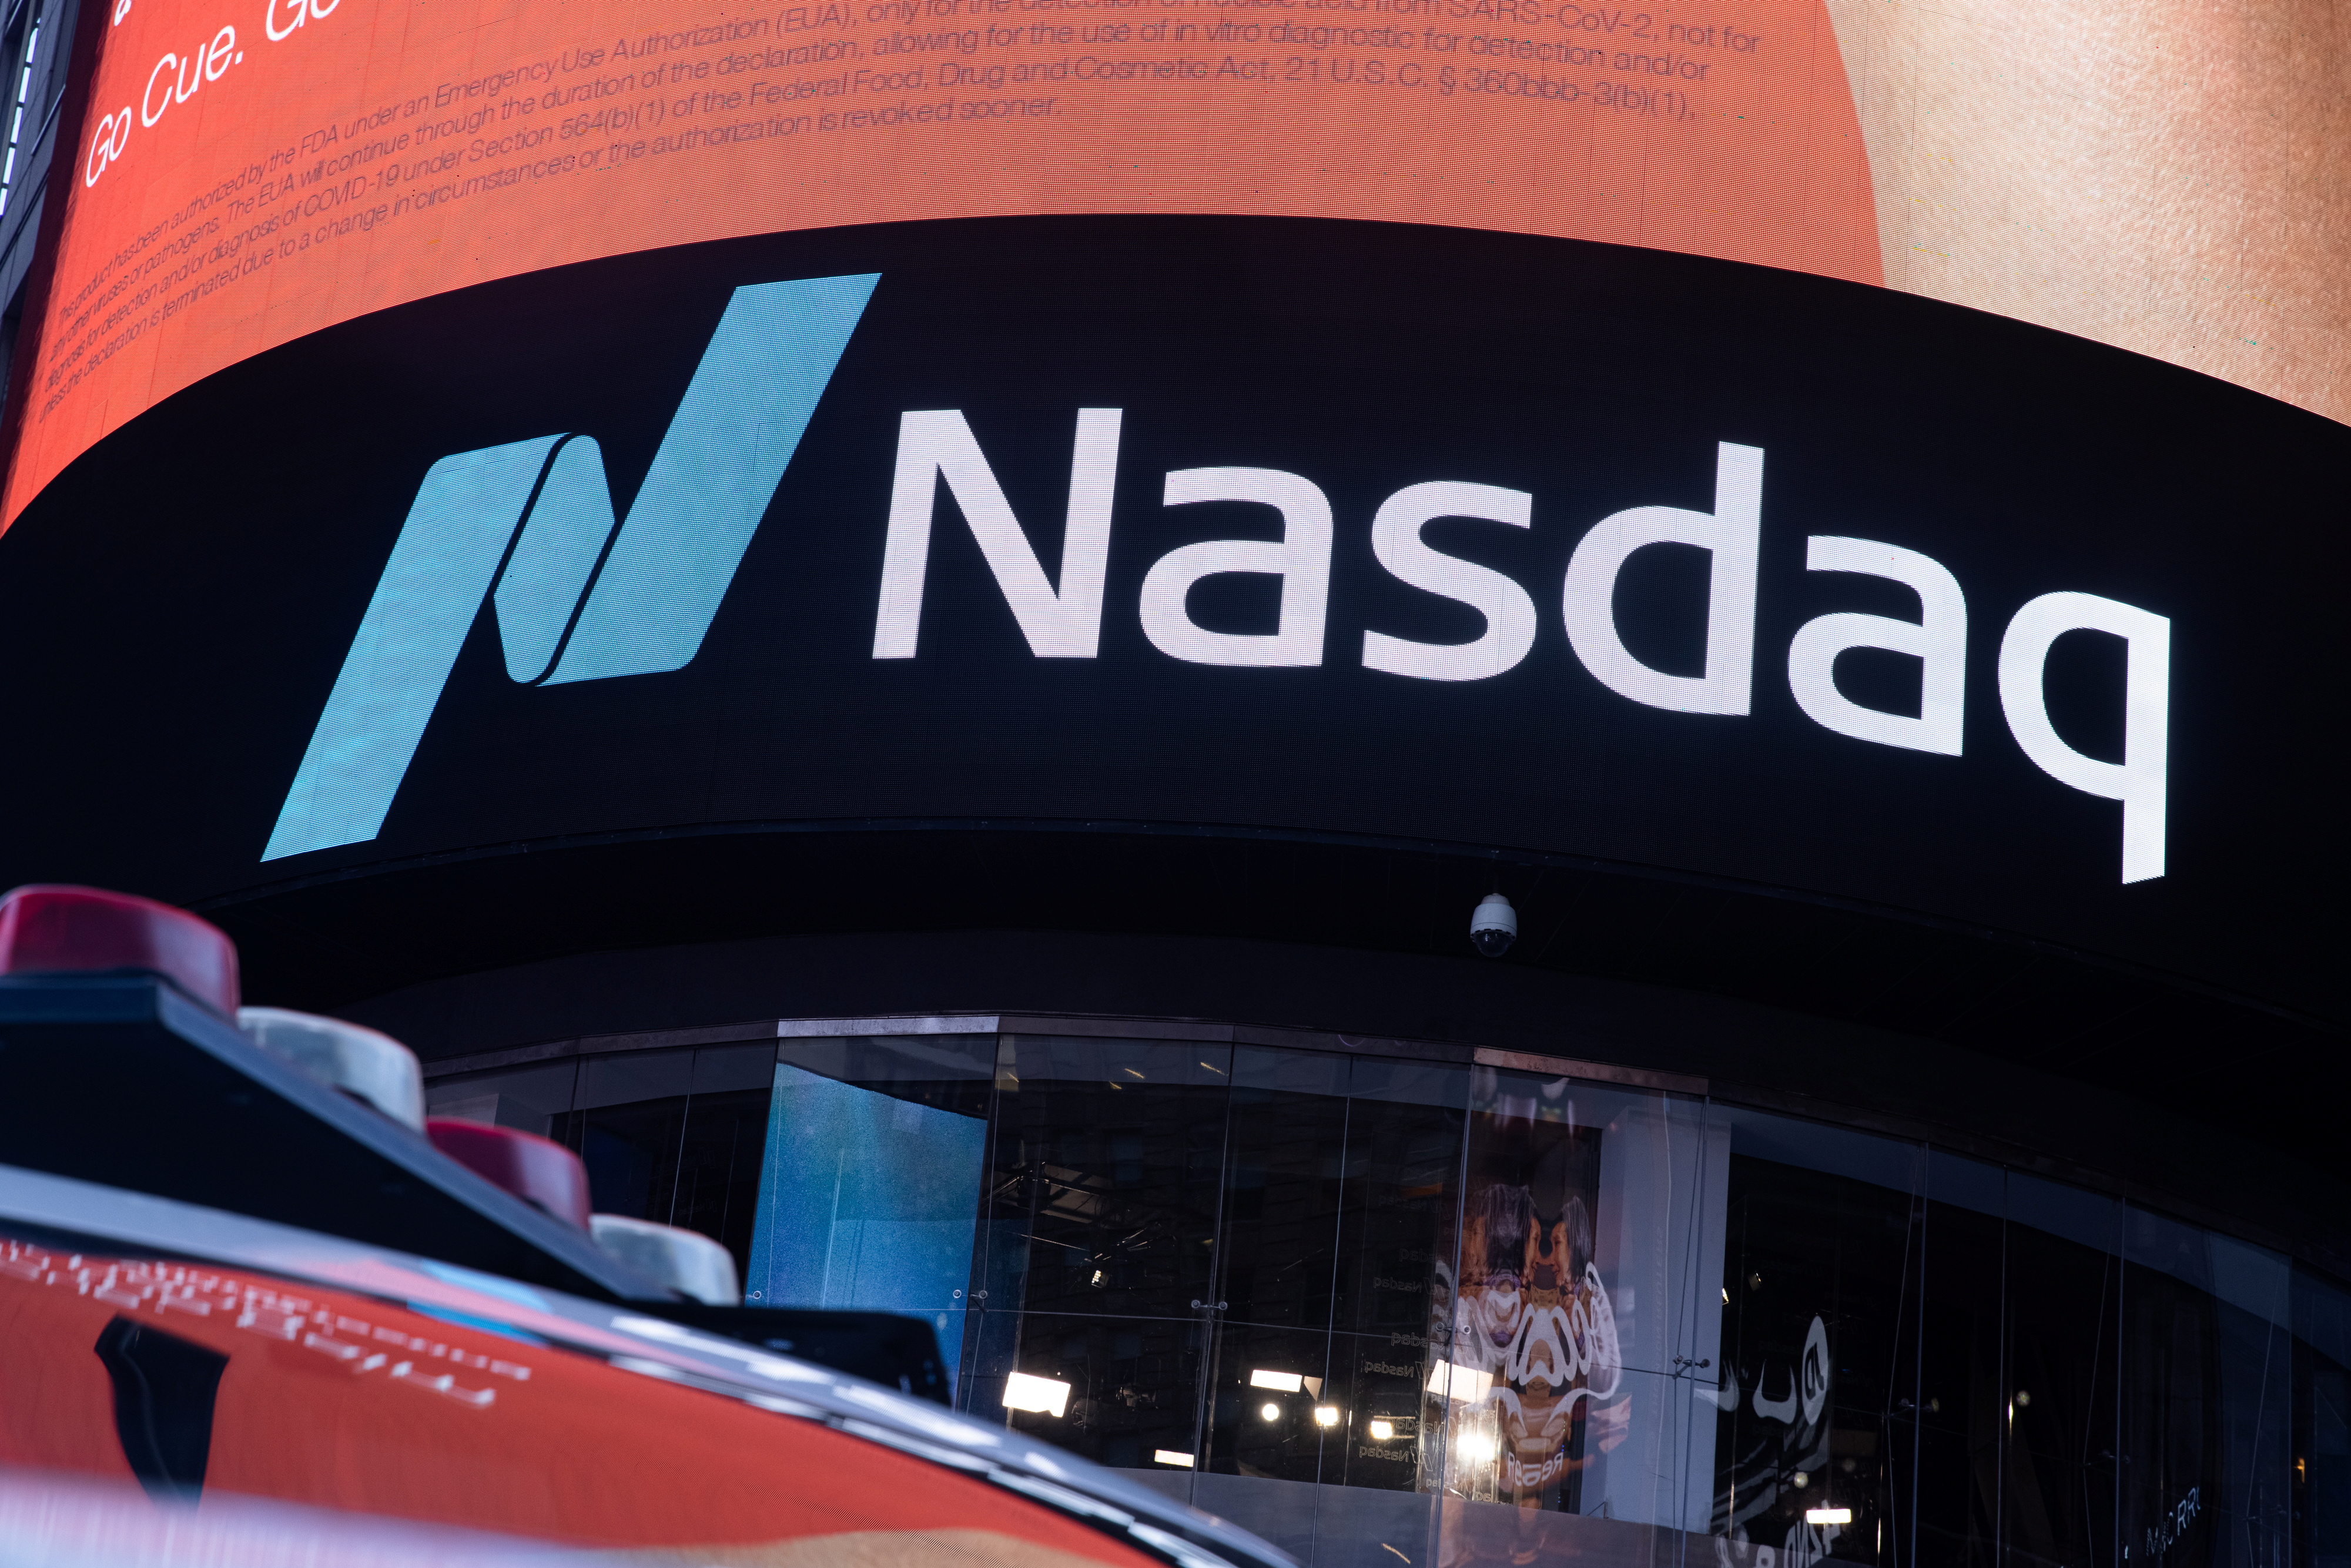 The Nasdaq logo is displayed at the Nasdaq Market site in Times Square in New York City, December 3, 2021. REUTERS/Jeenah Moon